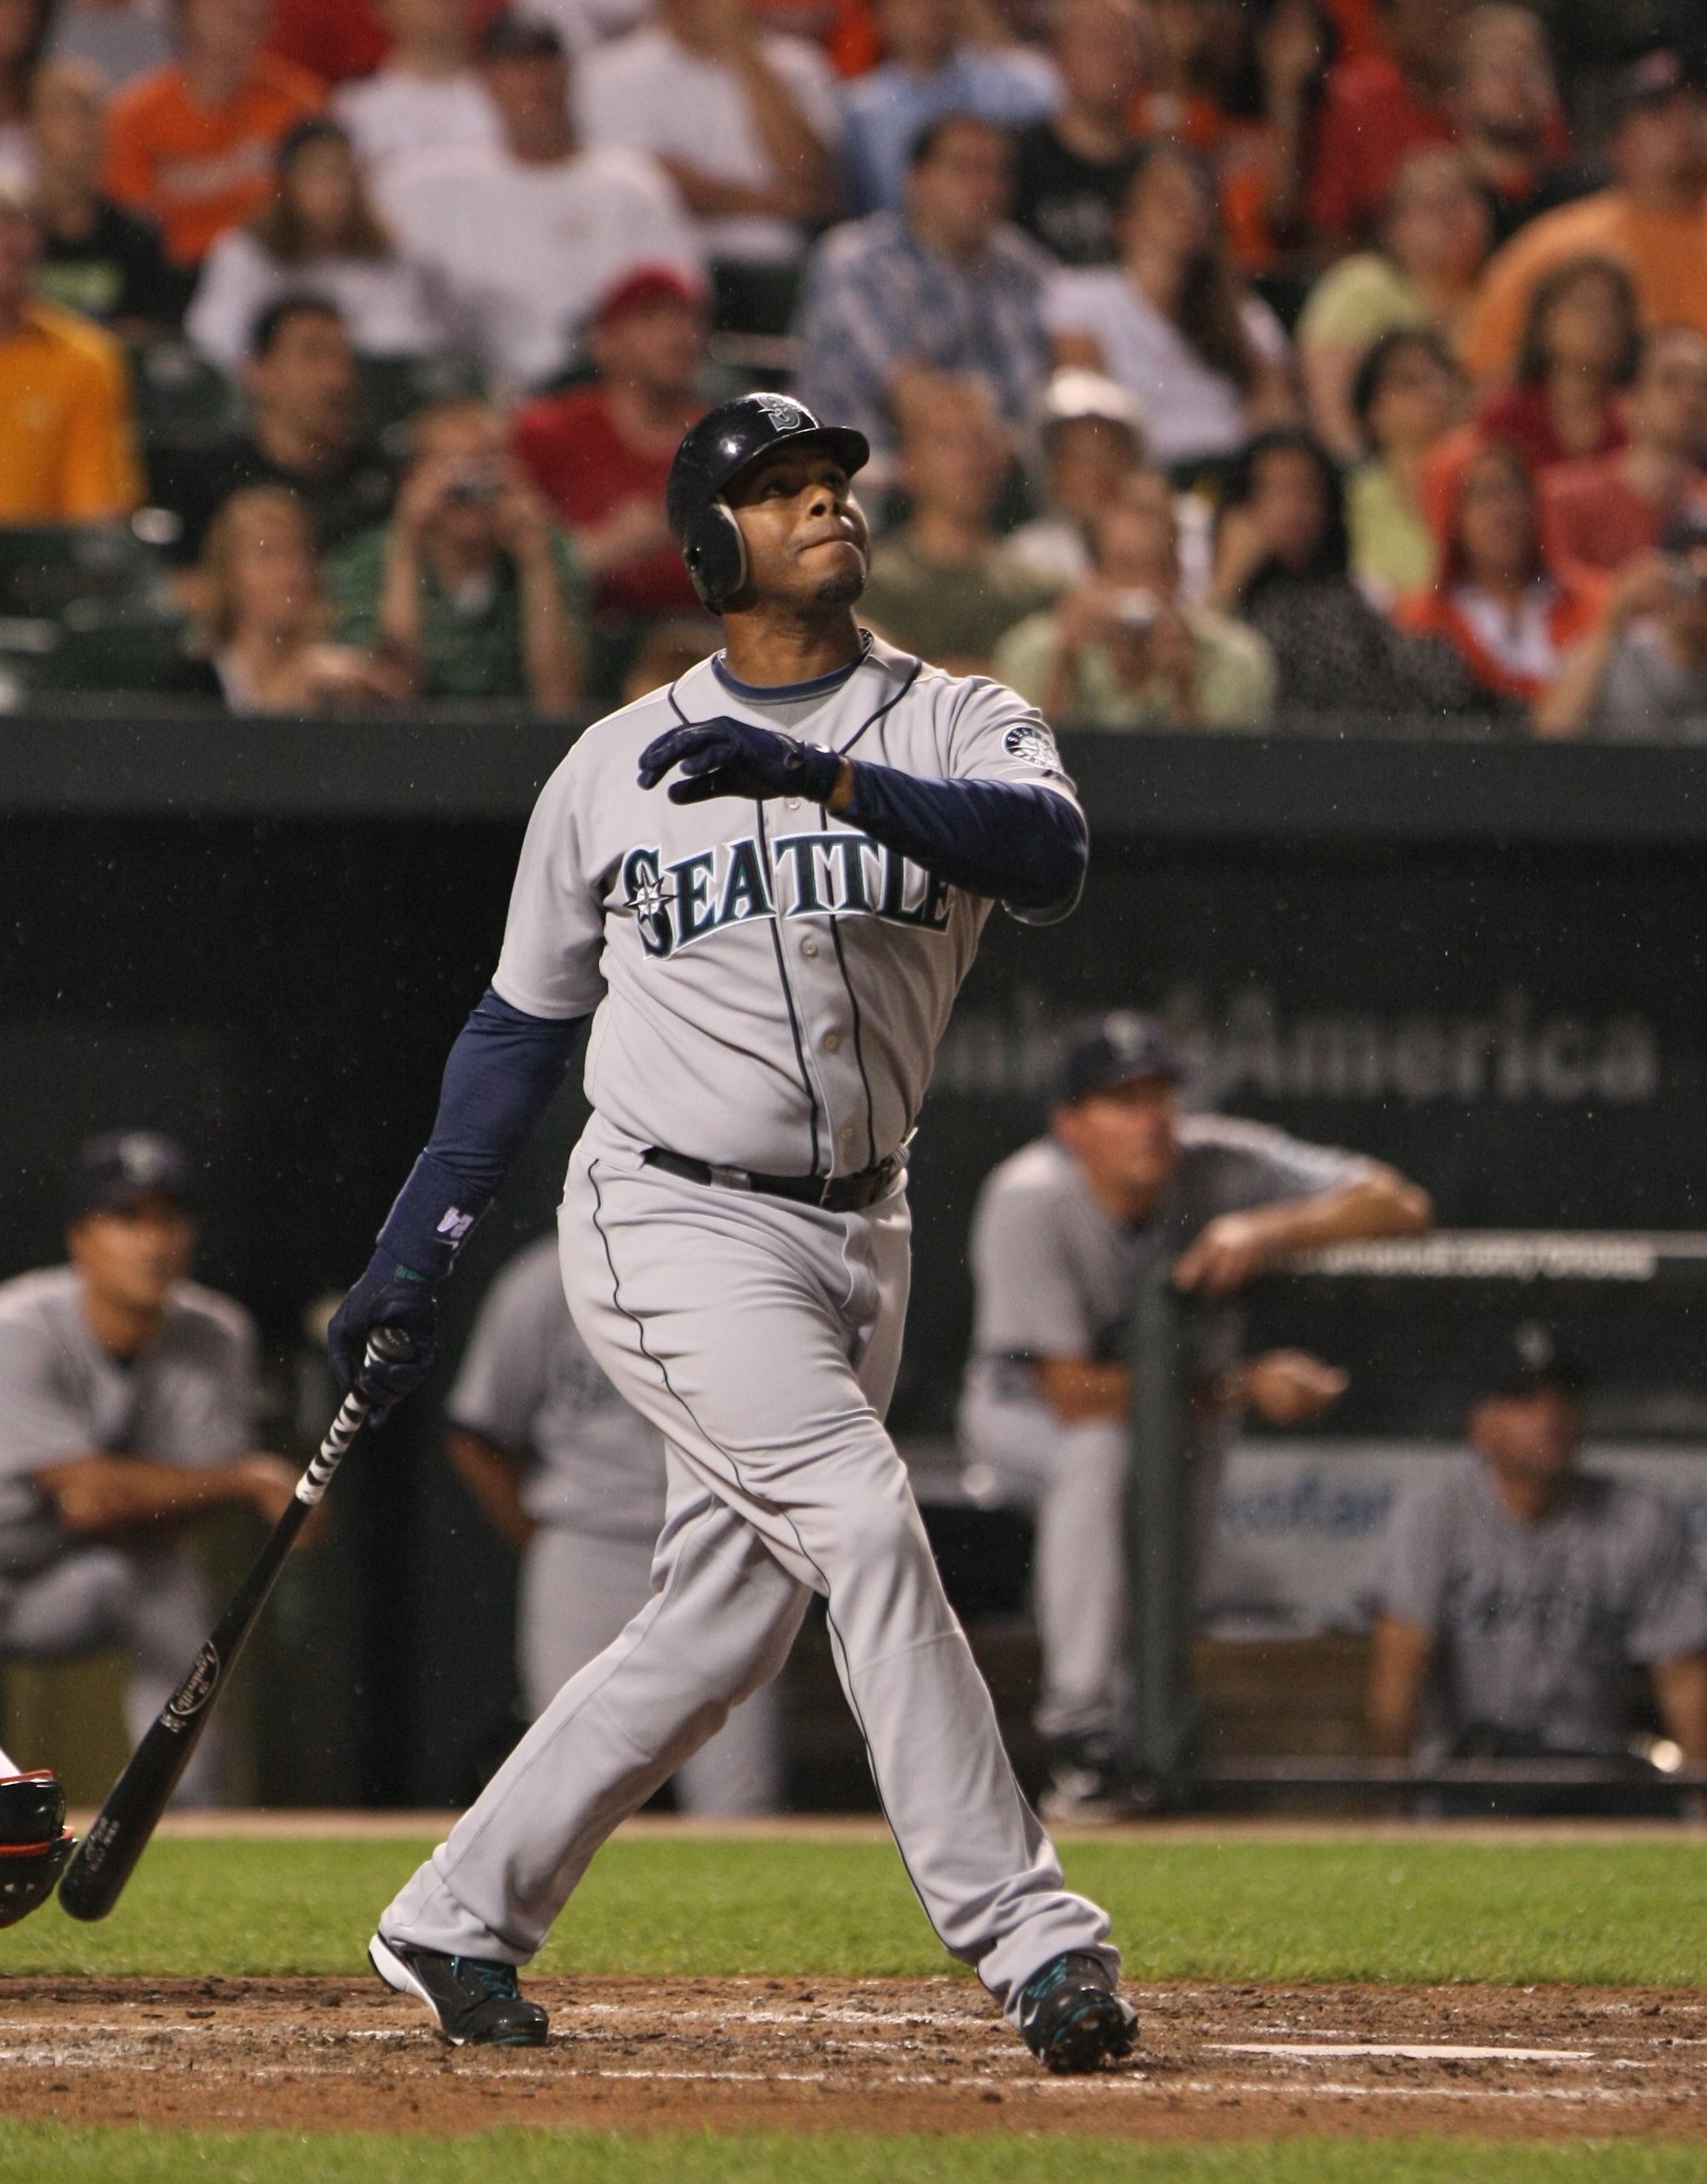 Ken Griffey Jr.: The Coolest There Ever Was